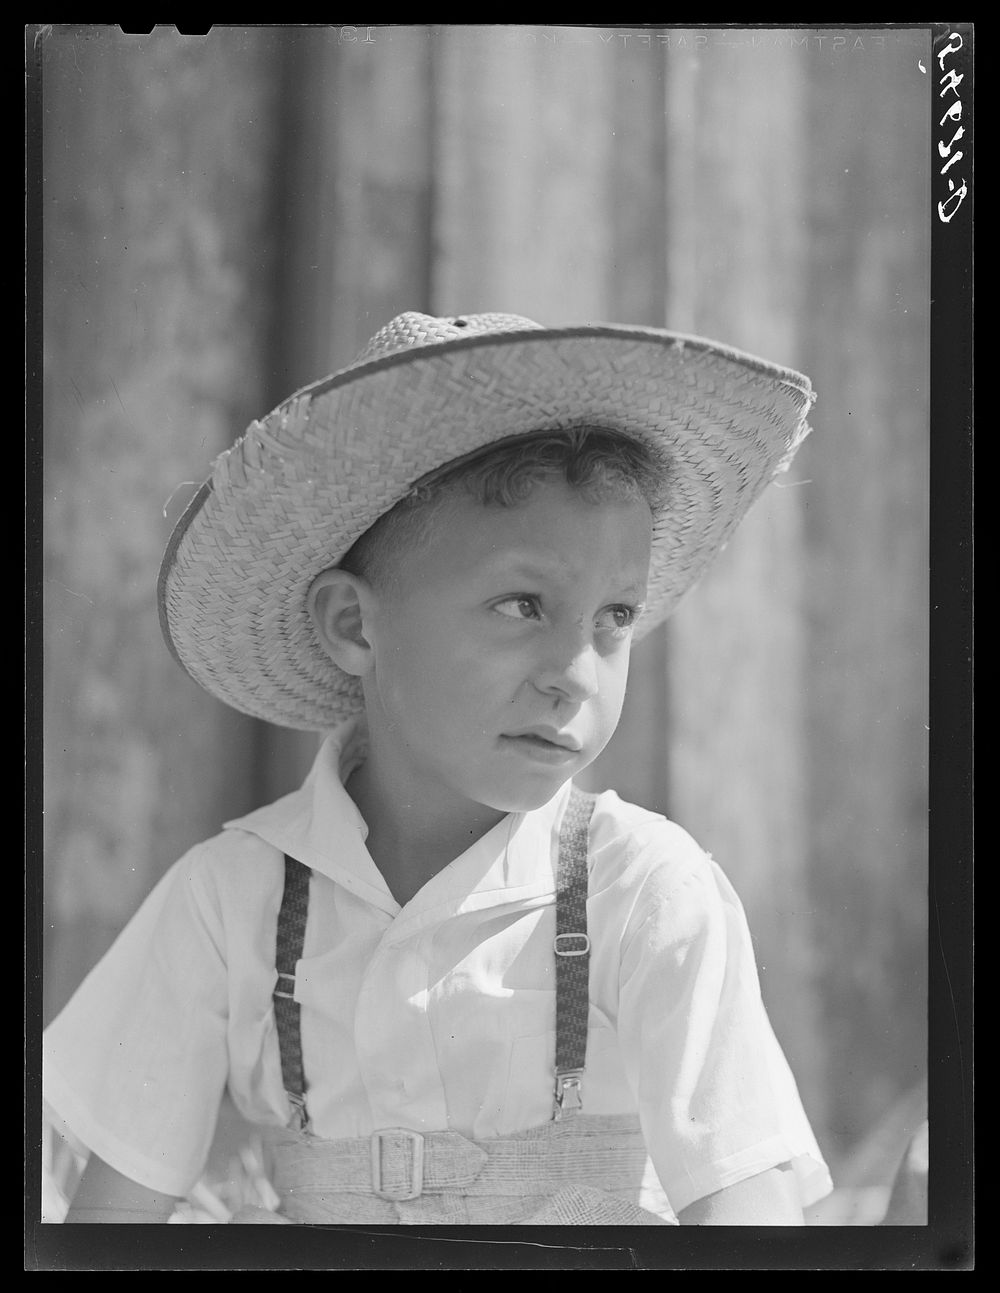 [Untitled photo, possibly related to: Melrose, Natchitoches Parish, Louisiana. Son of mulatto servant on John Henry cotton…